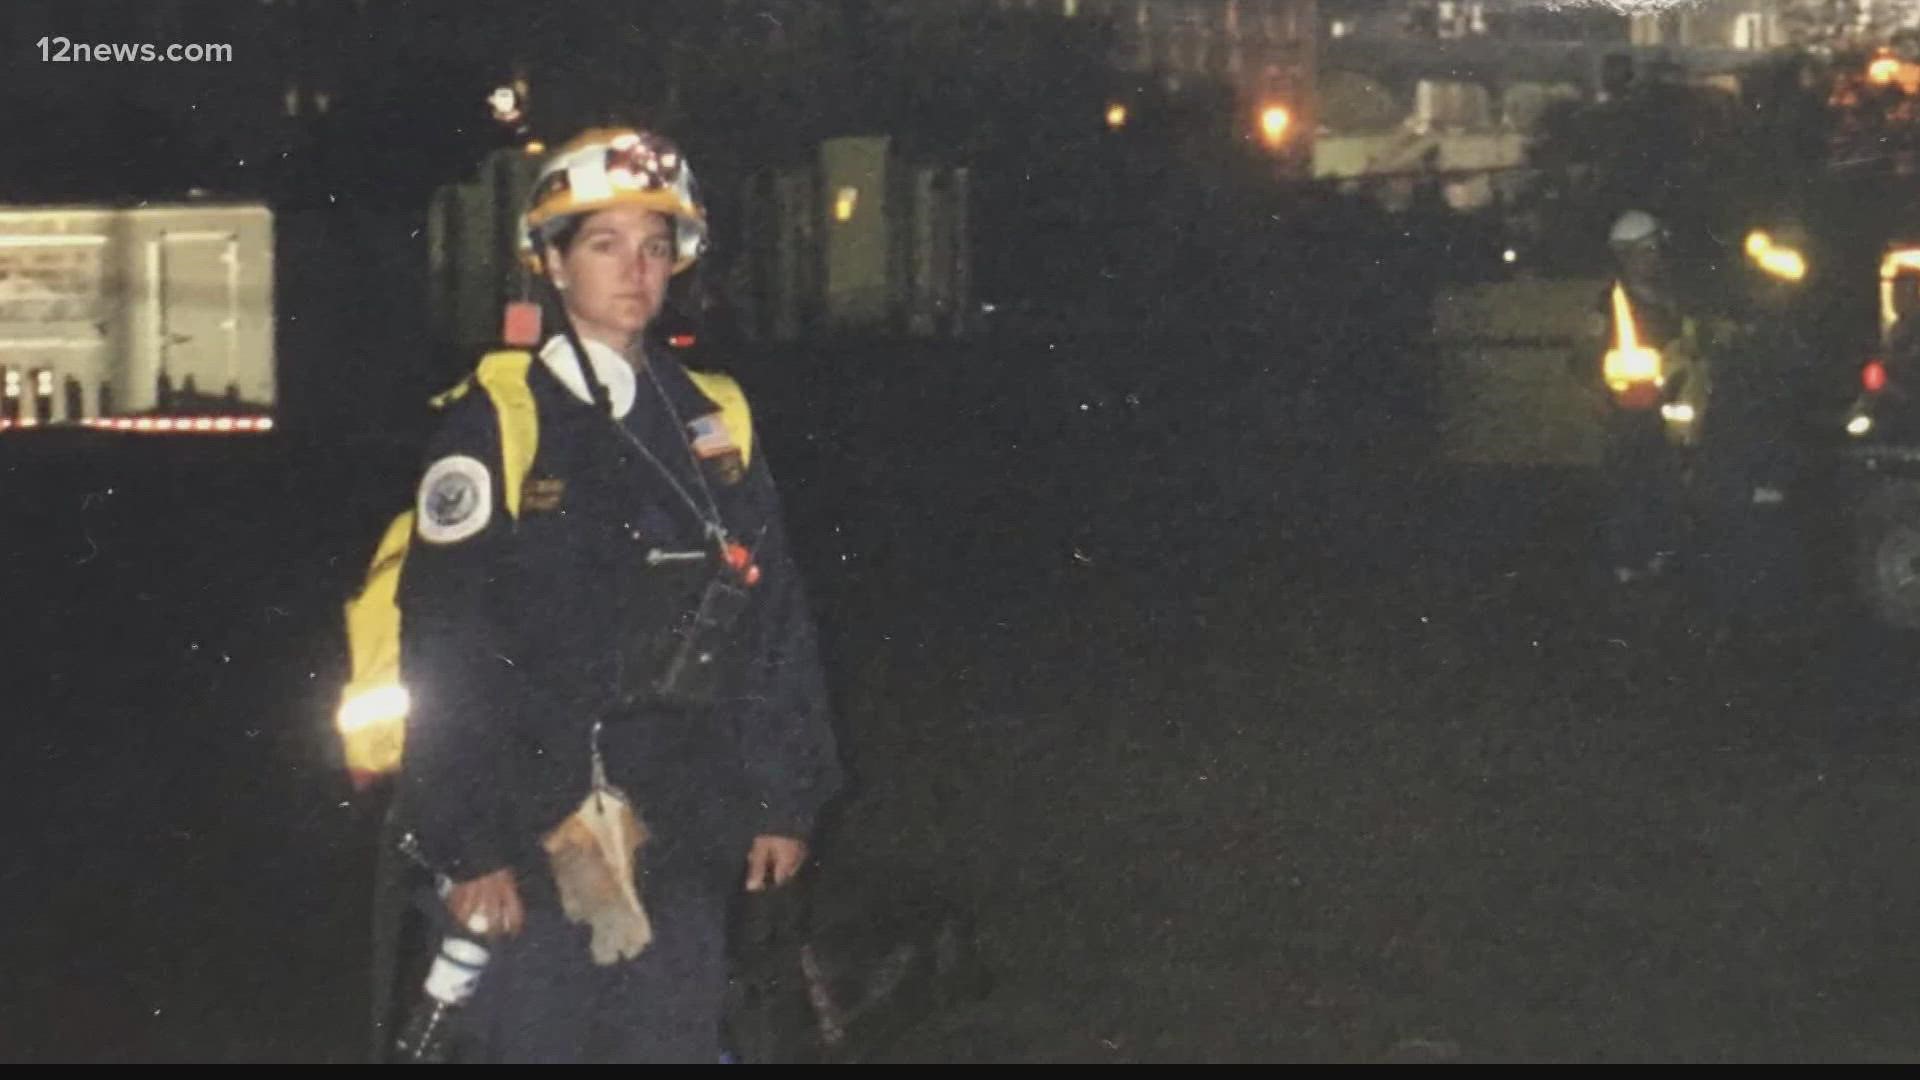 More than 60 first responders from Arizona worked to remove debris at ground zero 20 years ago. Today, they're still dealing with physical issues and mental pain.